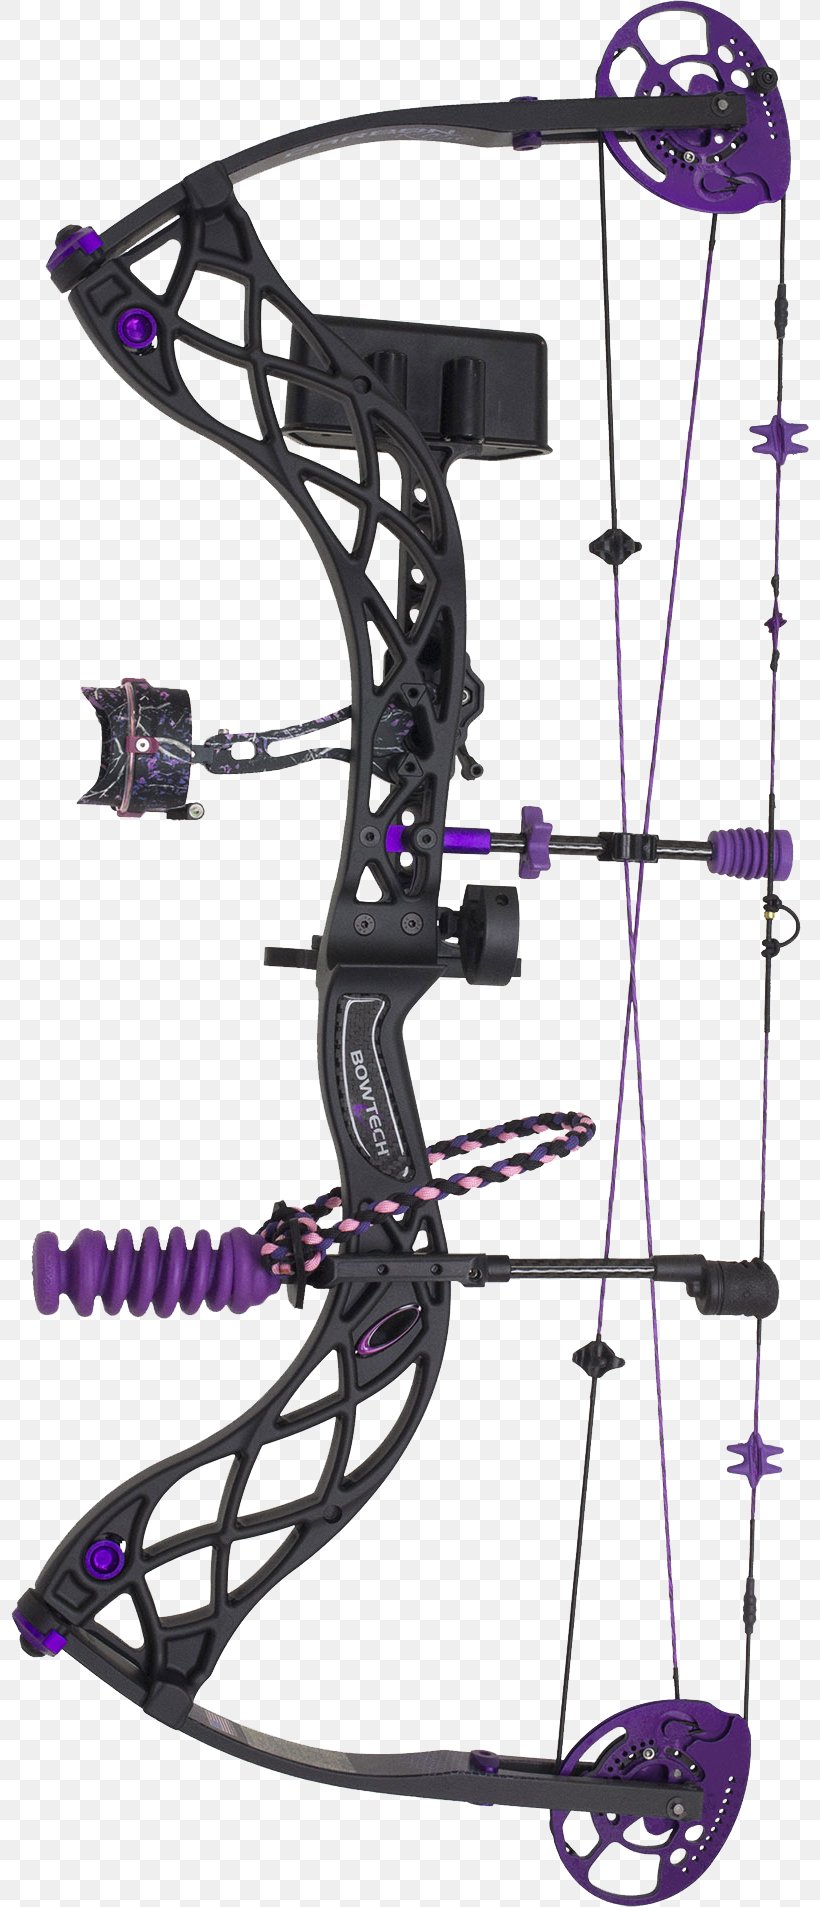 BowTech Archery Bowhunting Compound Bows Bow And Arrow, PNG, 800x1907px, Bowtech Archery, Archery, Bear Archery, Bow And Arrow, Bowhunting Download Free